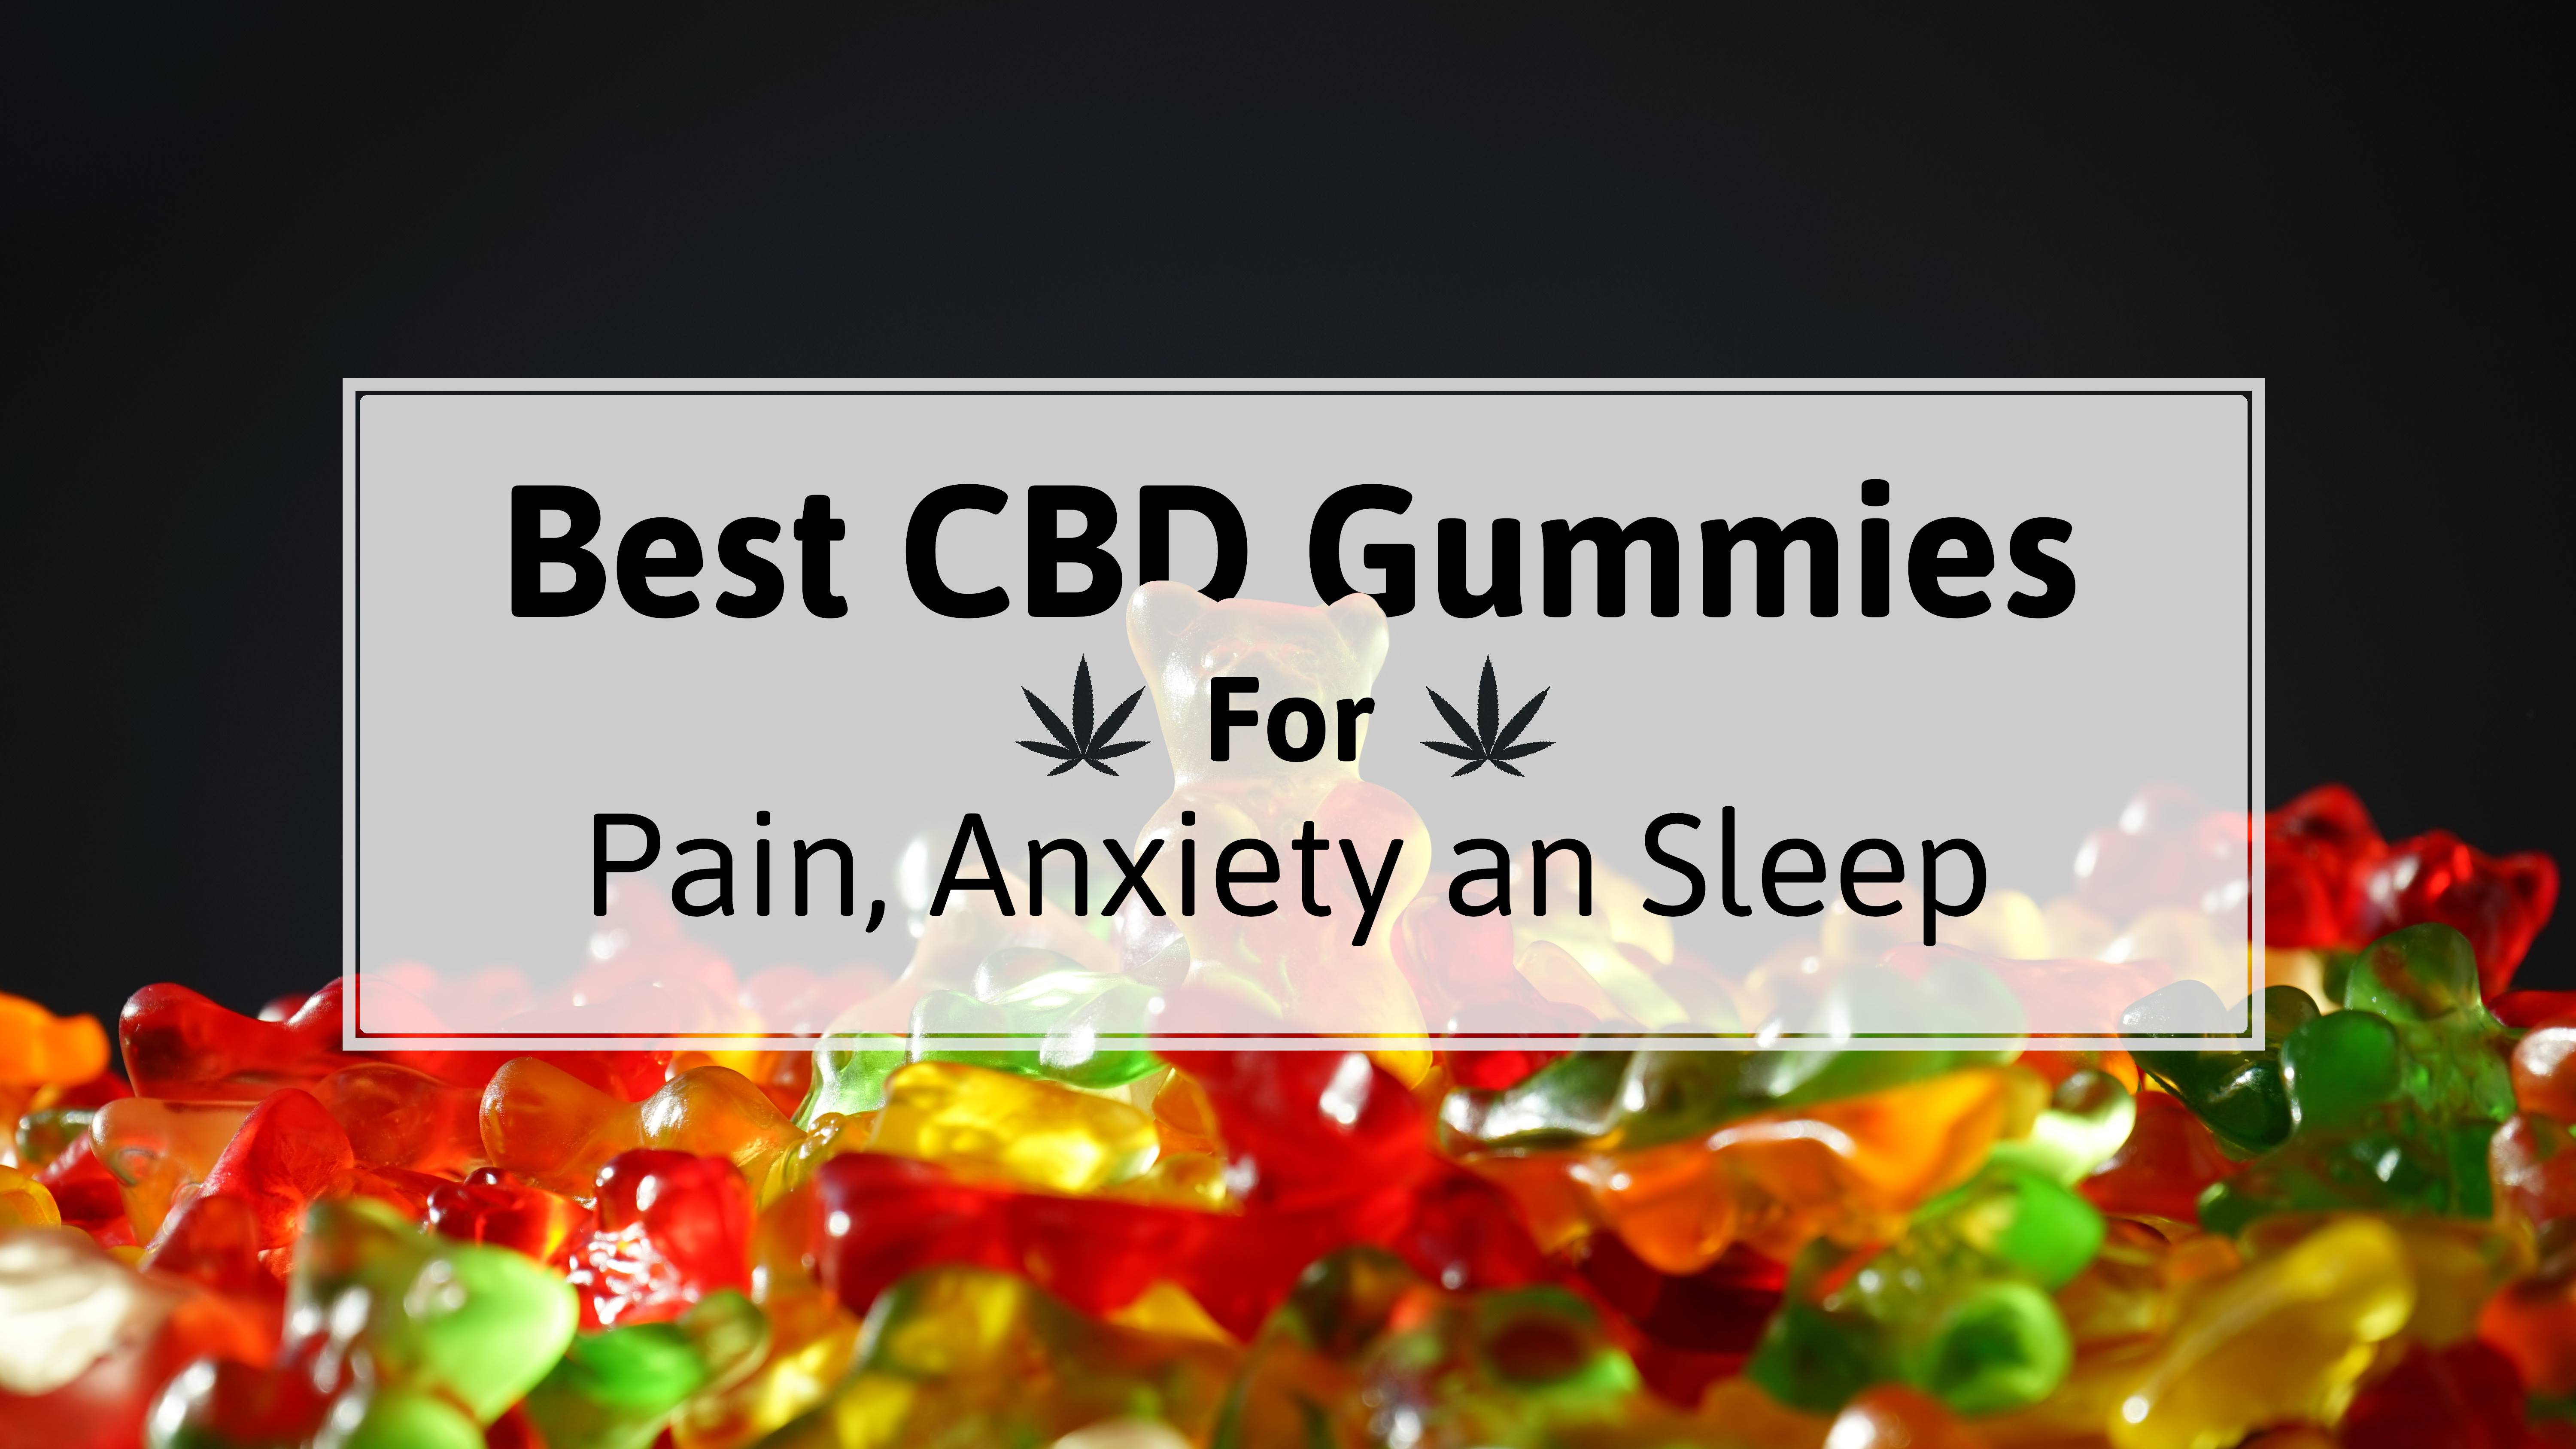 The Best CBD Gummies for Pain, Anxiety, and Sleep - The Weed Corner